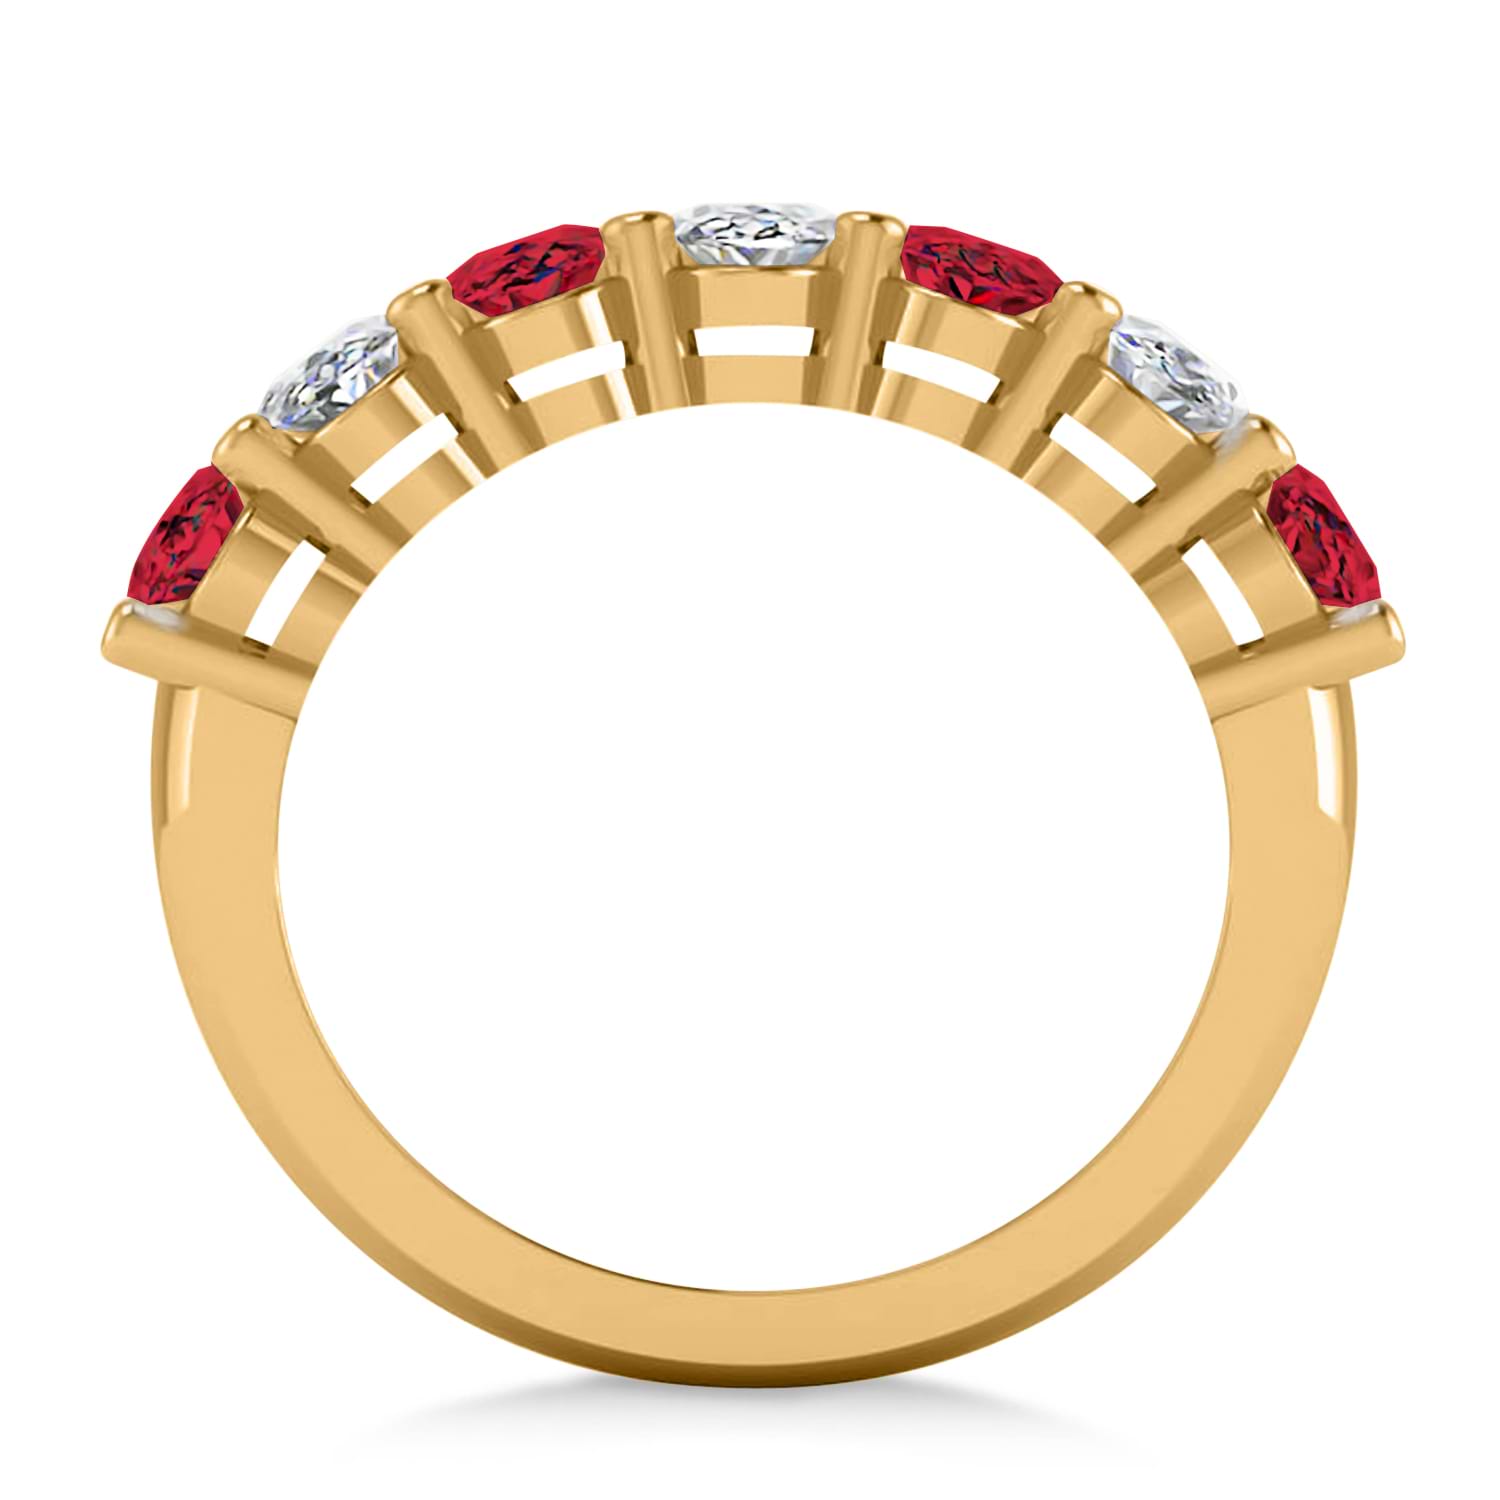 Oval Diamond & Ruby Seven Stone Ring 14k Yellow Gold (3.90ct)